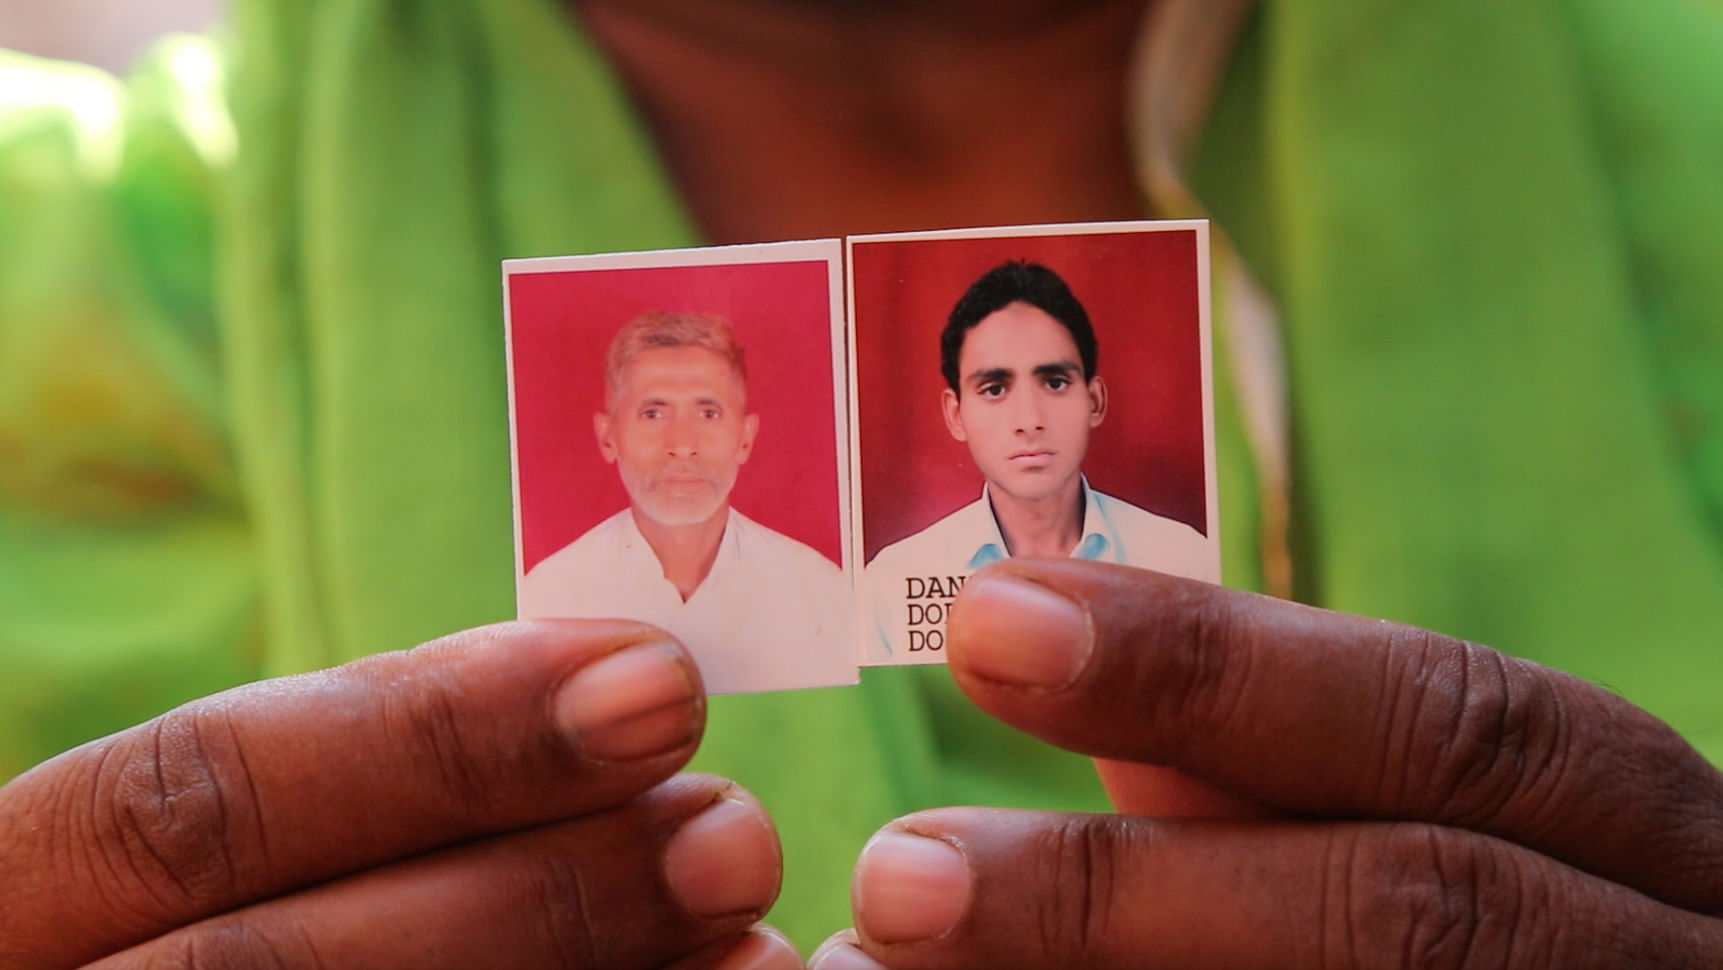 Mohammad Aklaqh (left photo) was lynched to death by an angry mob that accused him of cow slaughter. His son Danish (right photo) suffered serious head injuries and is fighting for life in a Noida hospital. (Photo: <b>The Quint</b>)&nbsp;